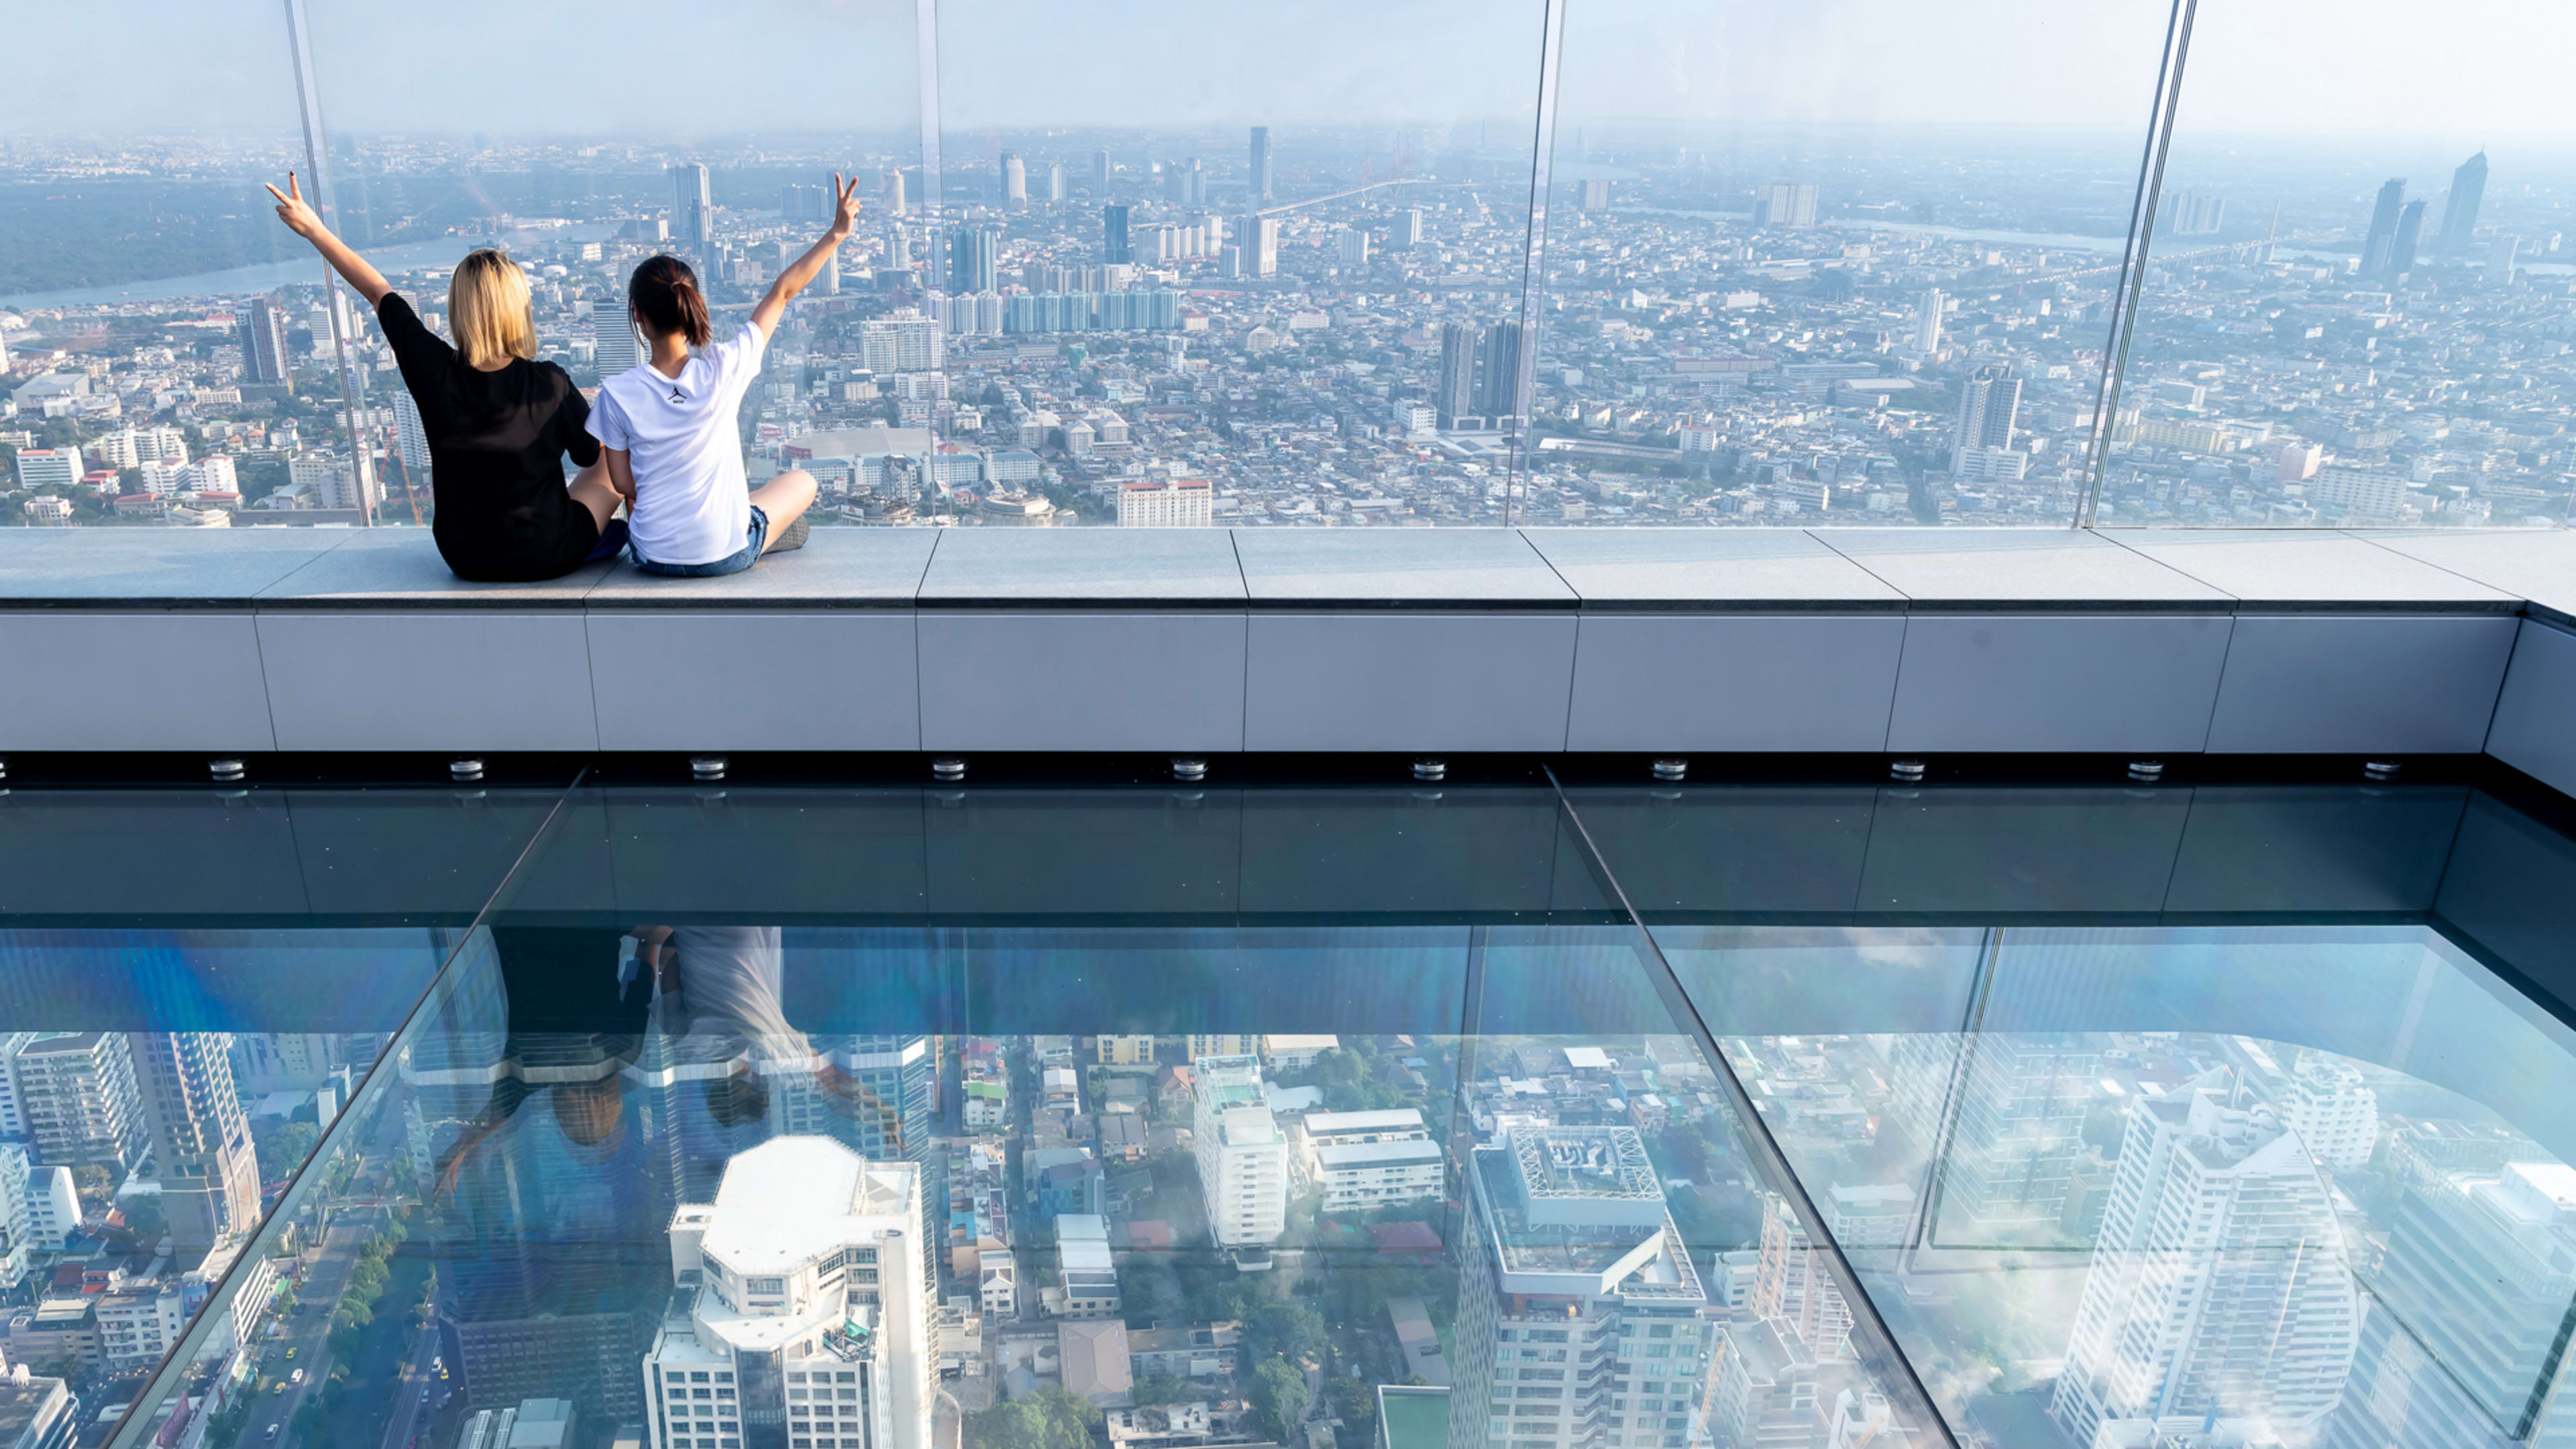 This terrifying glass deck lets you hover 1,000 feet above Bangkok